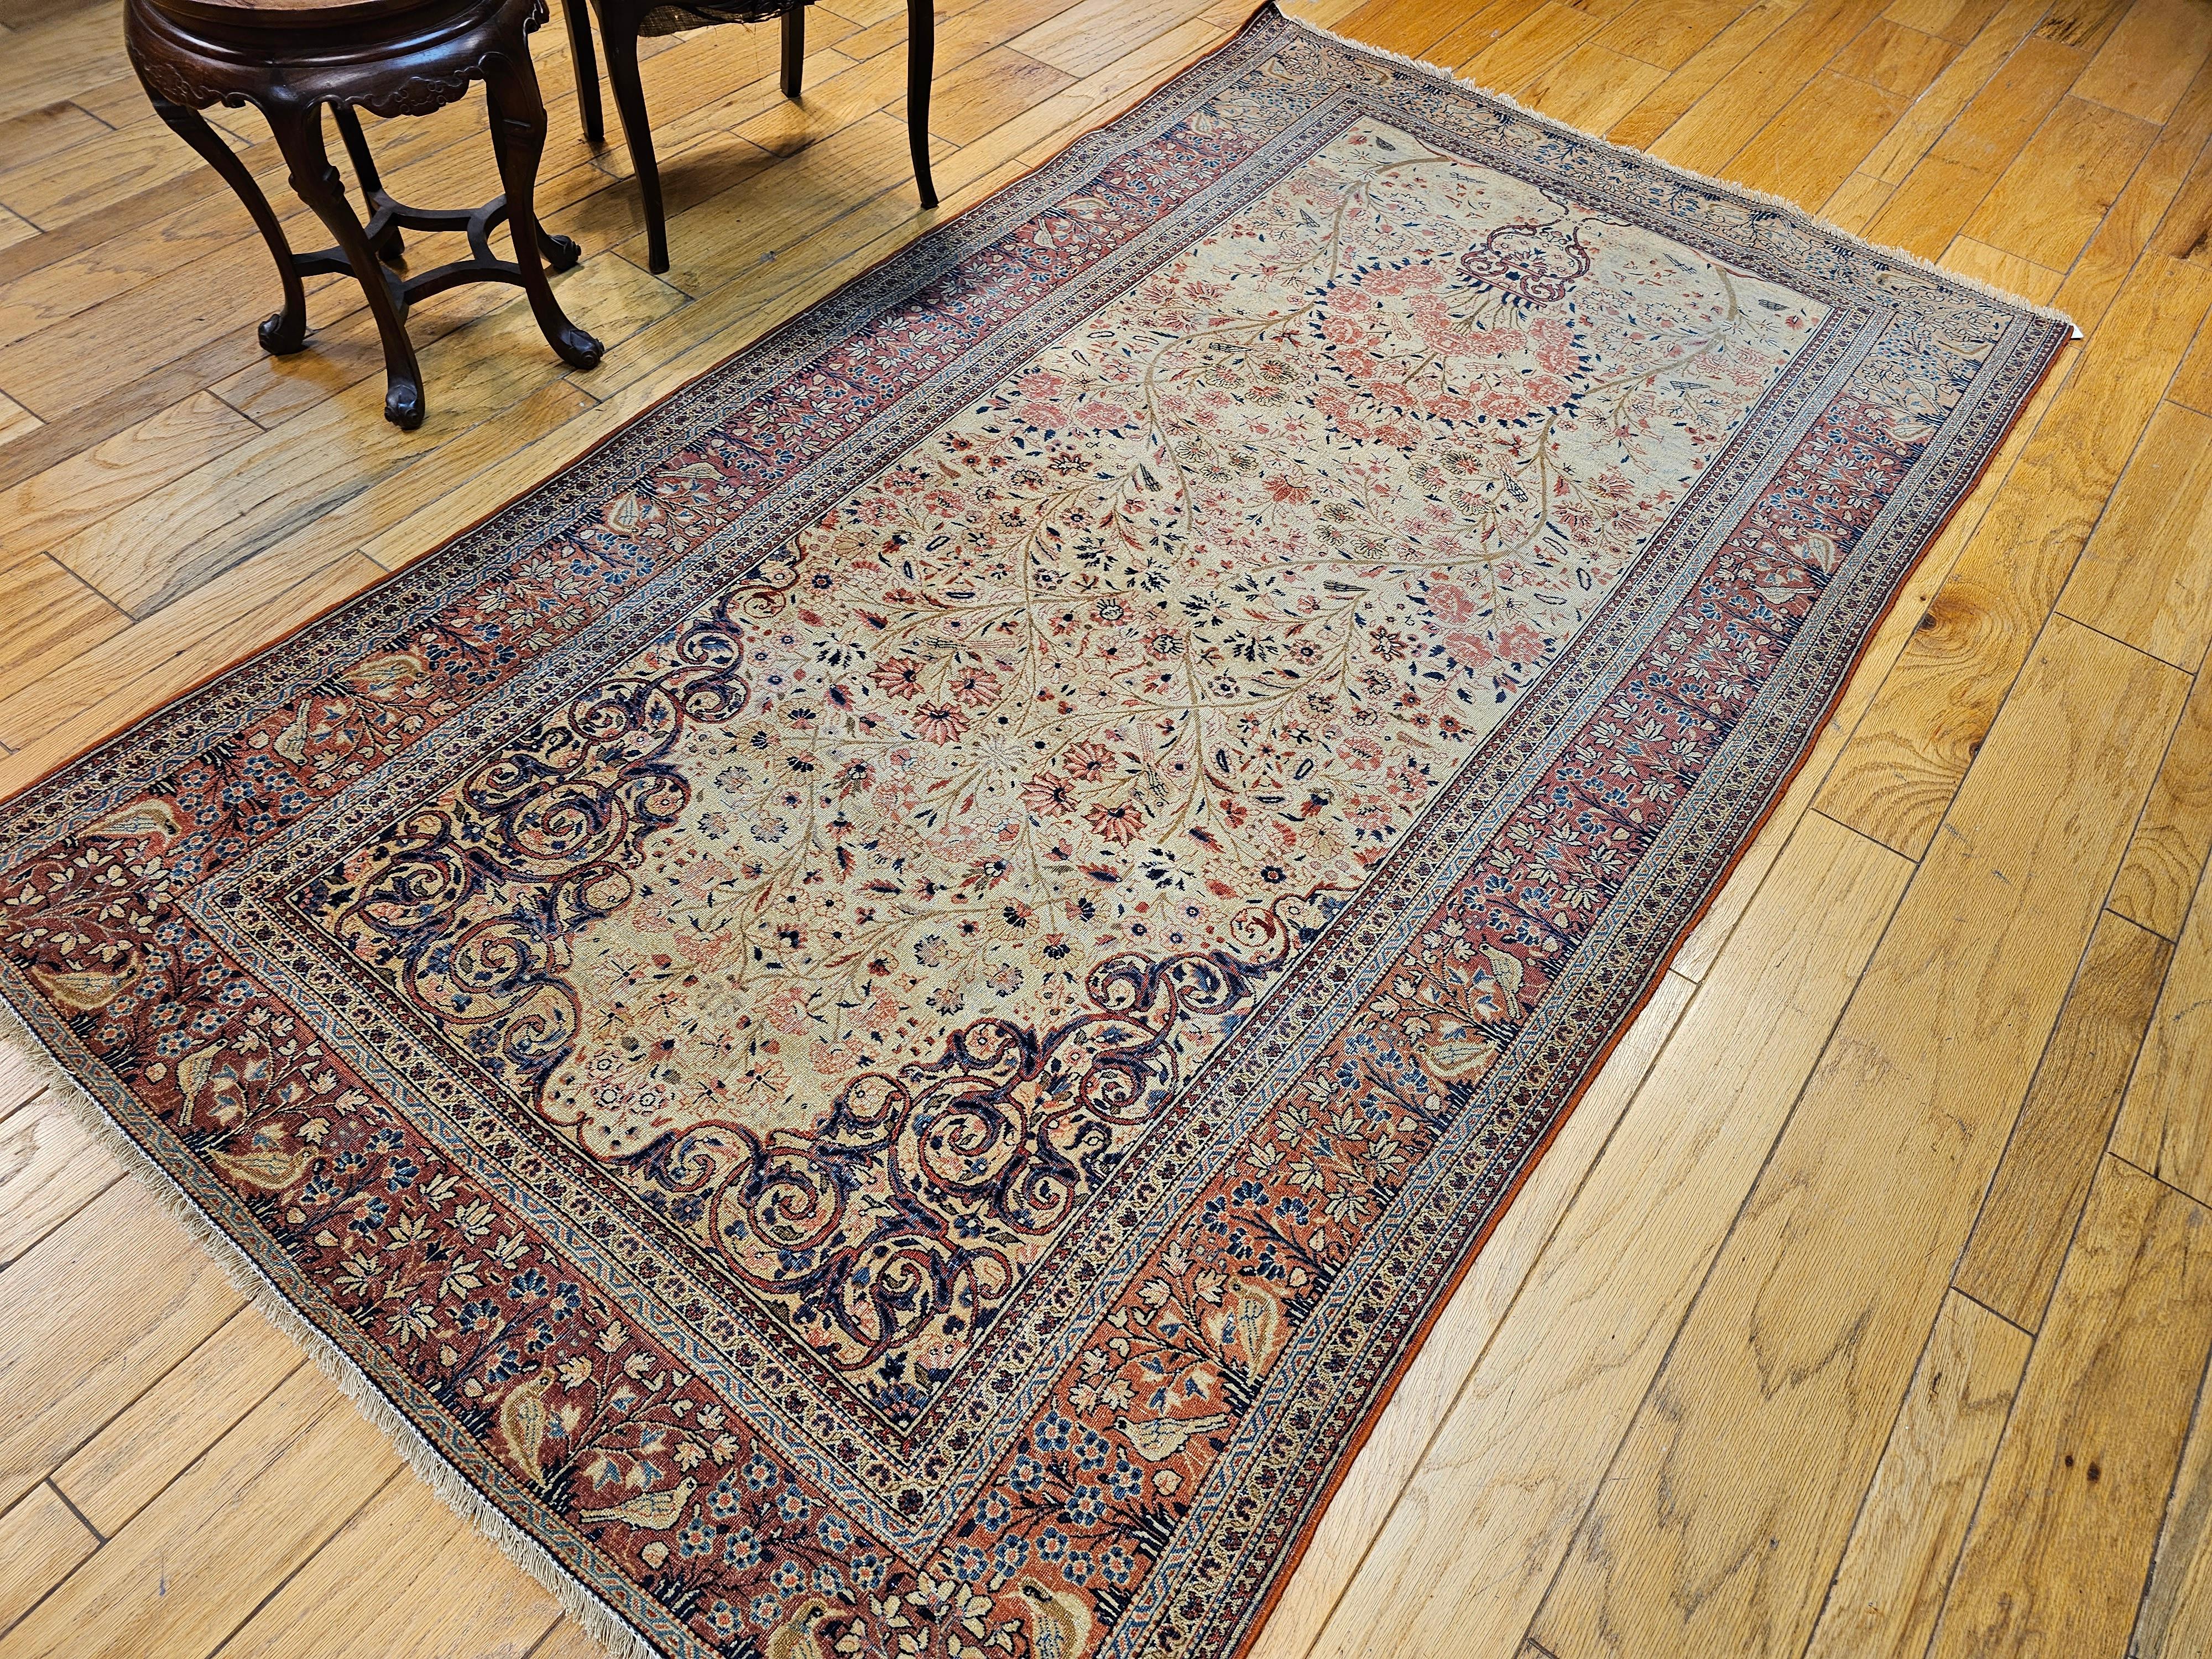 19th Century Persian Kashan Vase “Tree of Life” Rug in Ivory, Brick Red, Navy For Sale 10